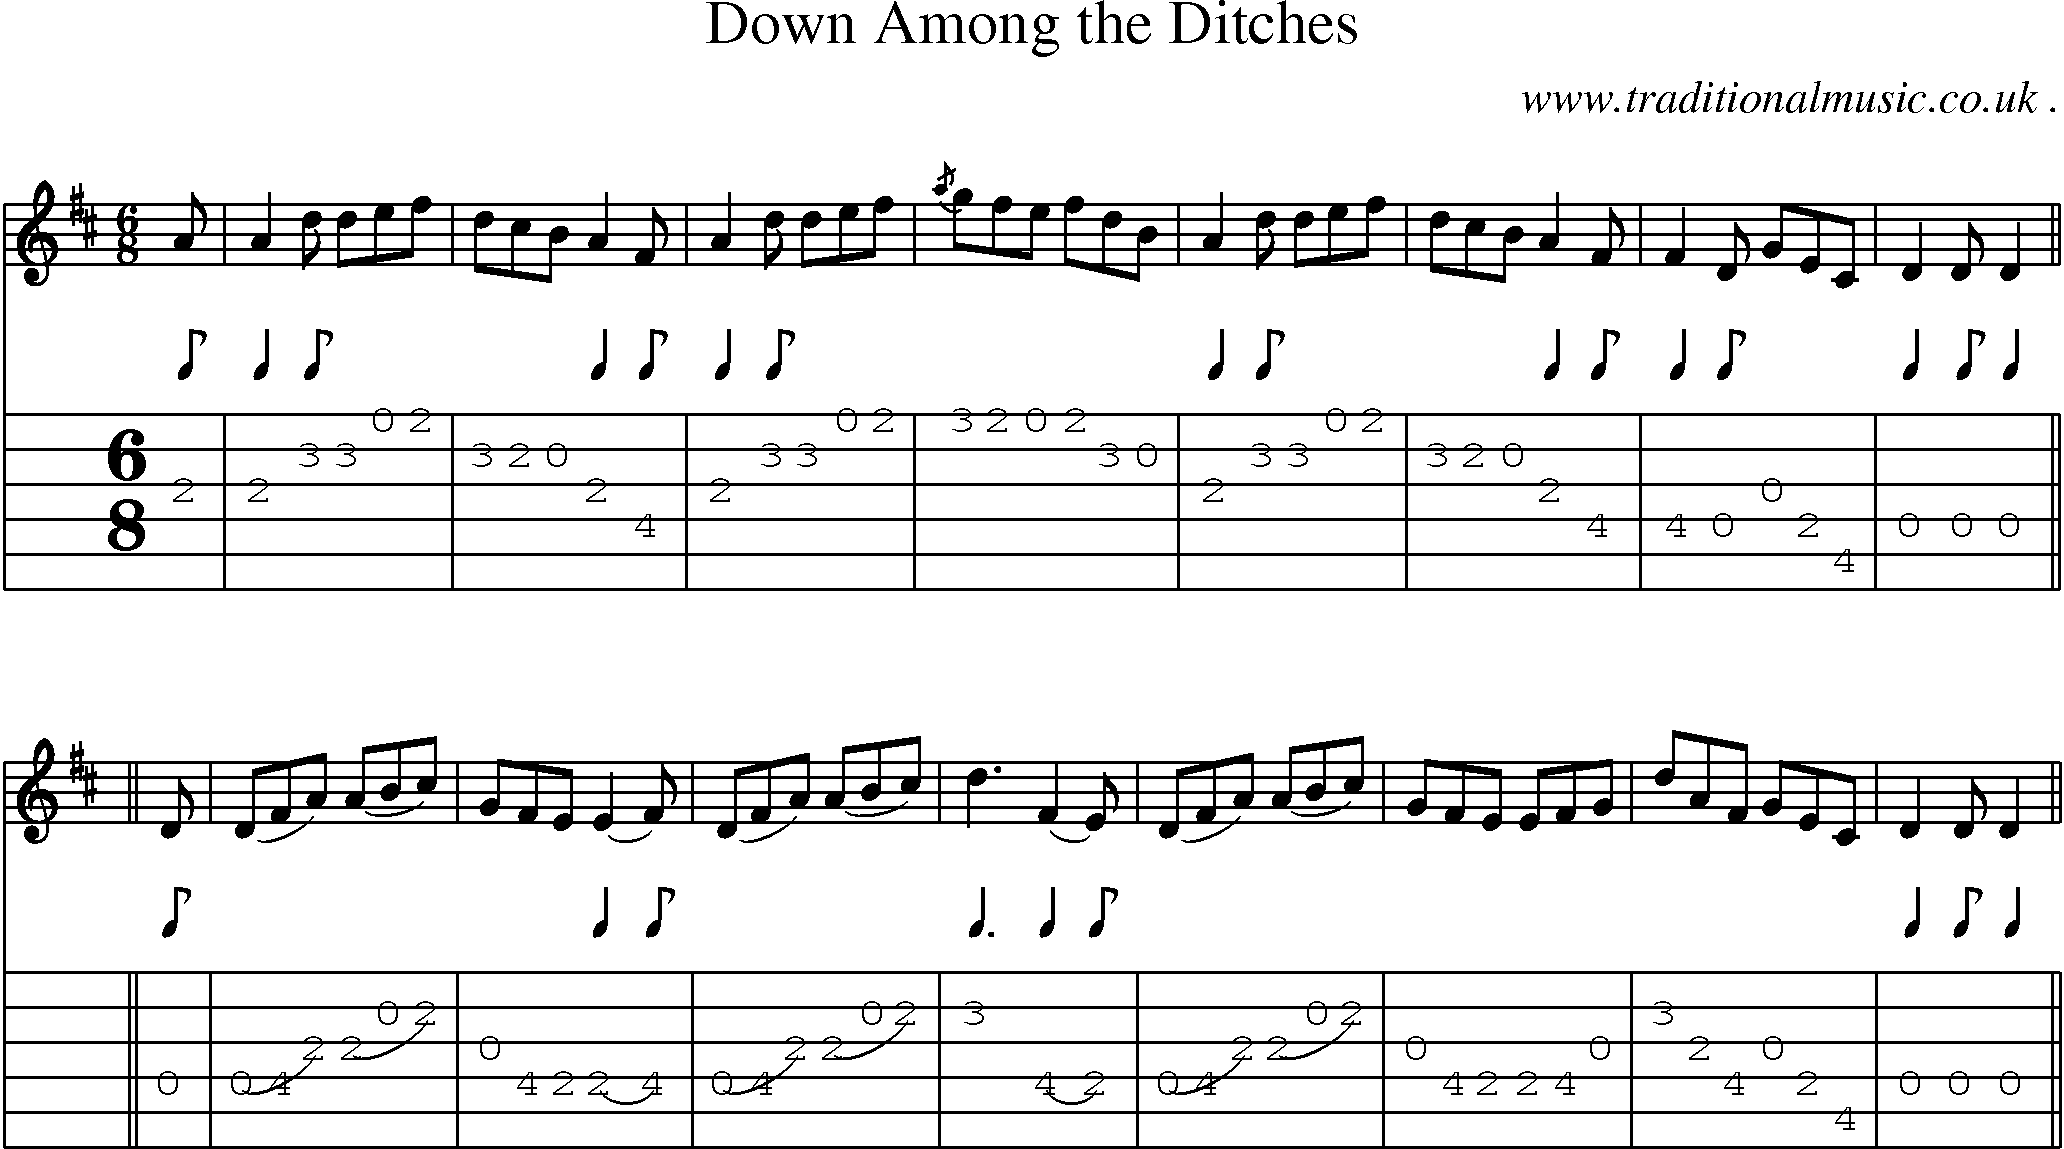 Sheet-music  score, Chords and Guitar Tabs for Down Among The Ditches